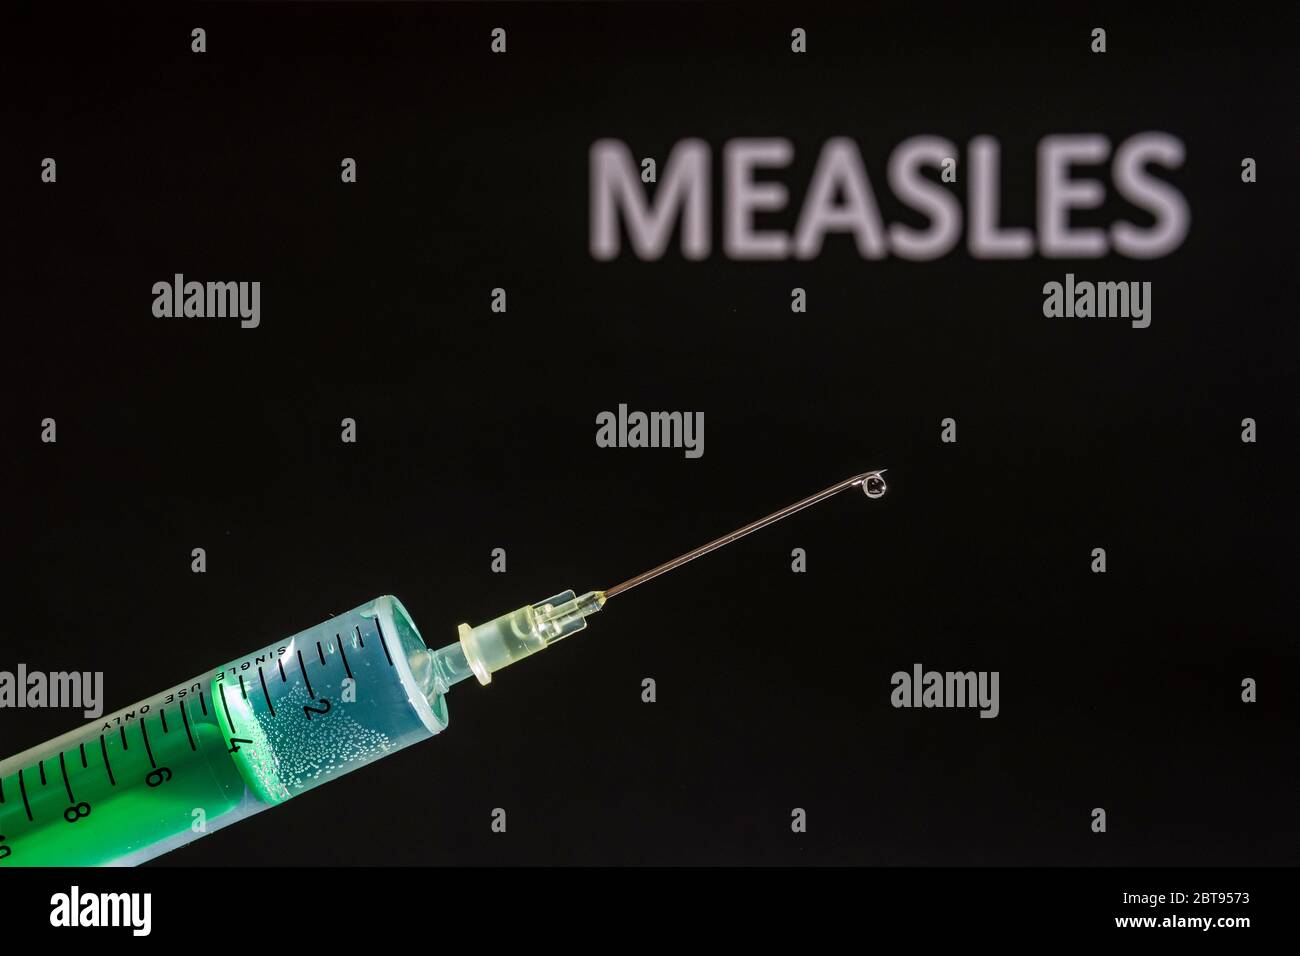 This photo illustration shows a disposable syringe with hypodermic needle, MEASLES written on a black board behind Stock Photo